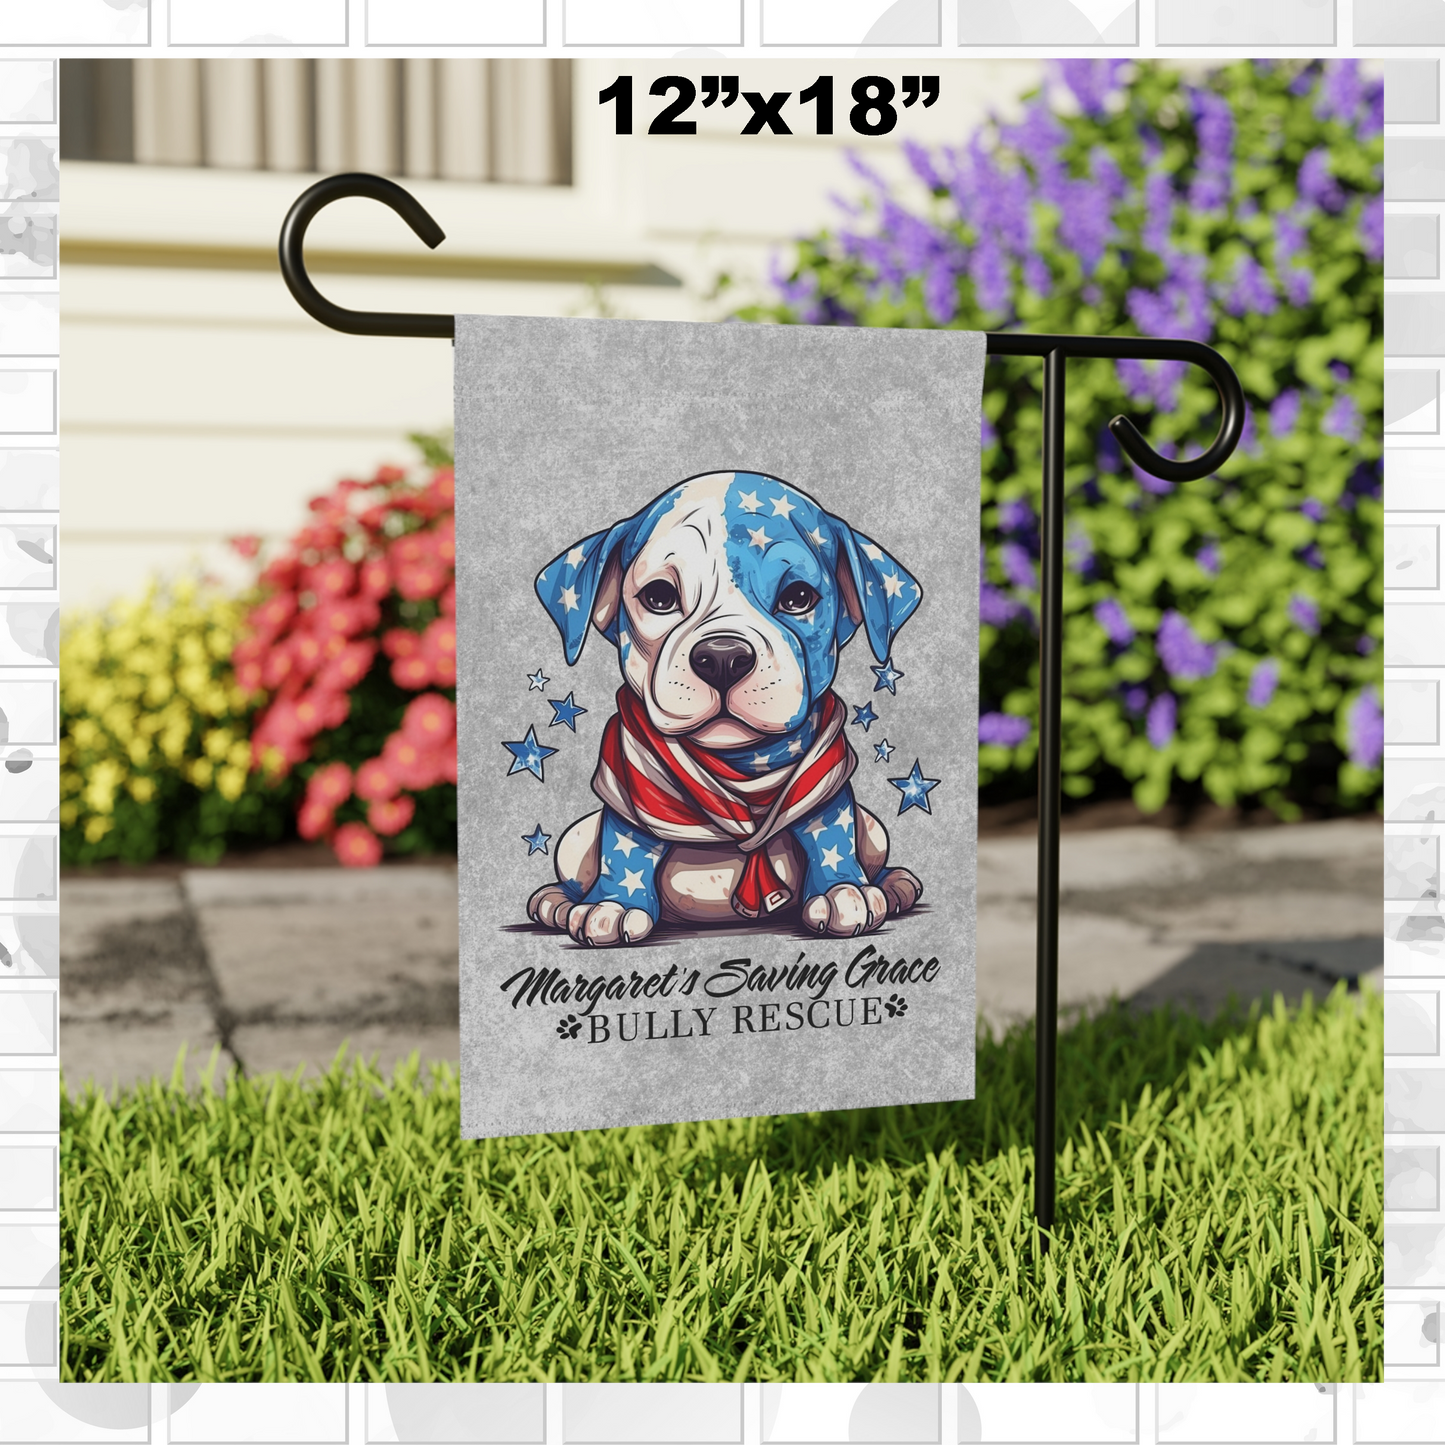 MSGBR Bully Rescue Pitbull Dog Breed Patriotic American Puppy Garden / House Flag